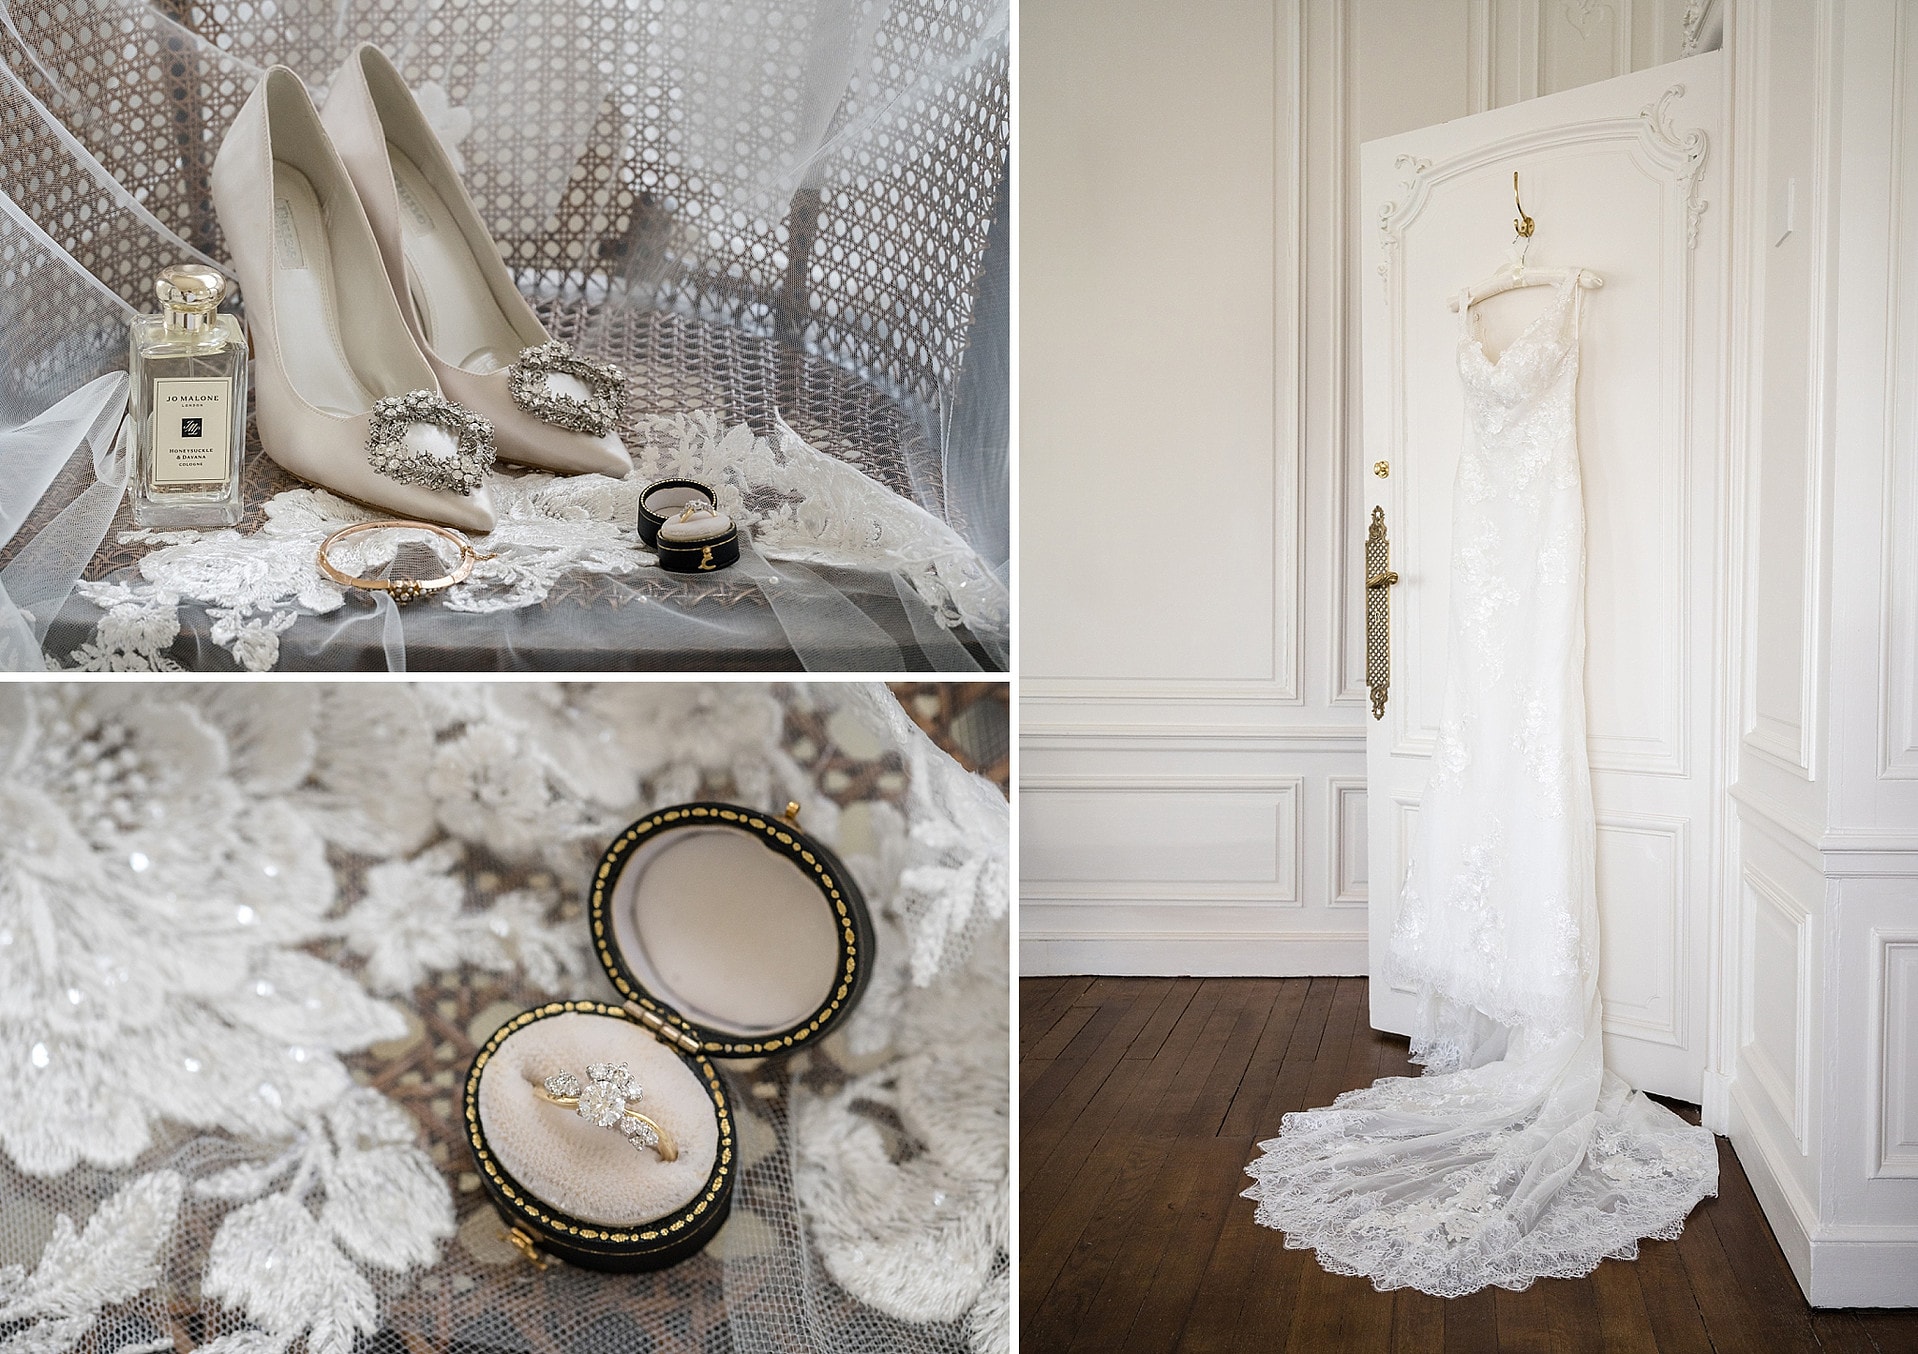 Bride's wedding dress, shoes, perfume and jewellery